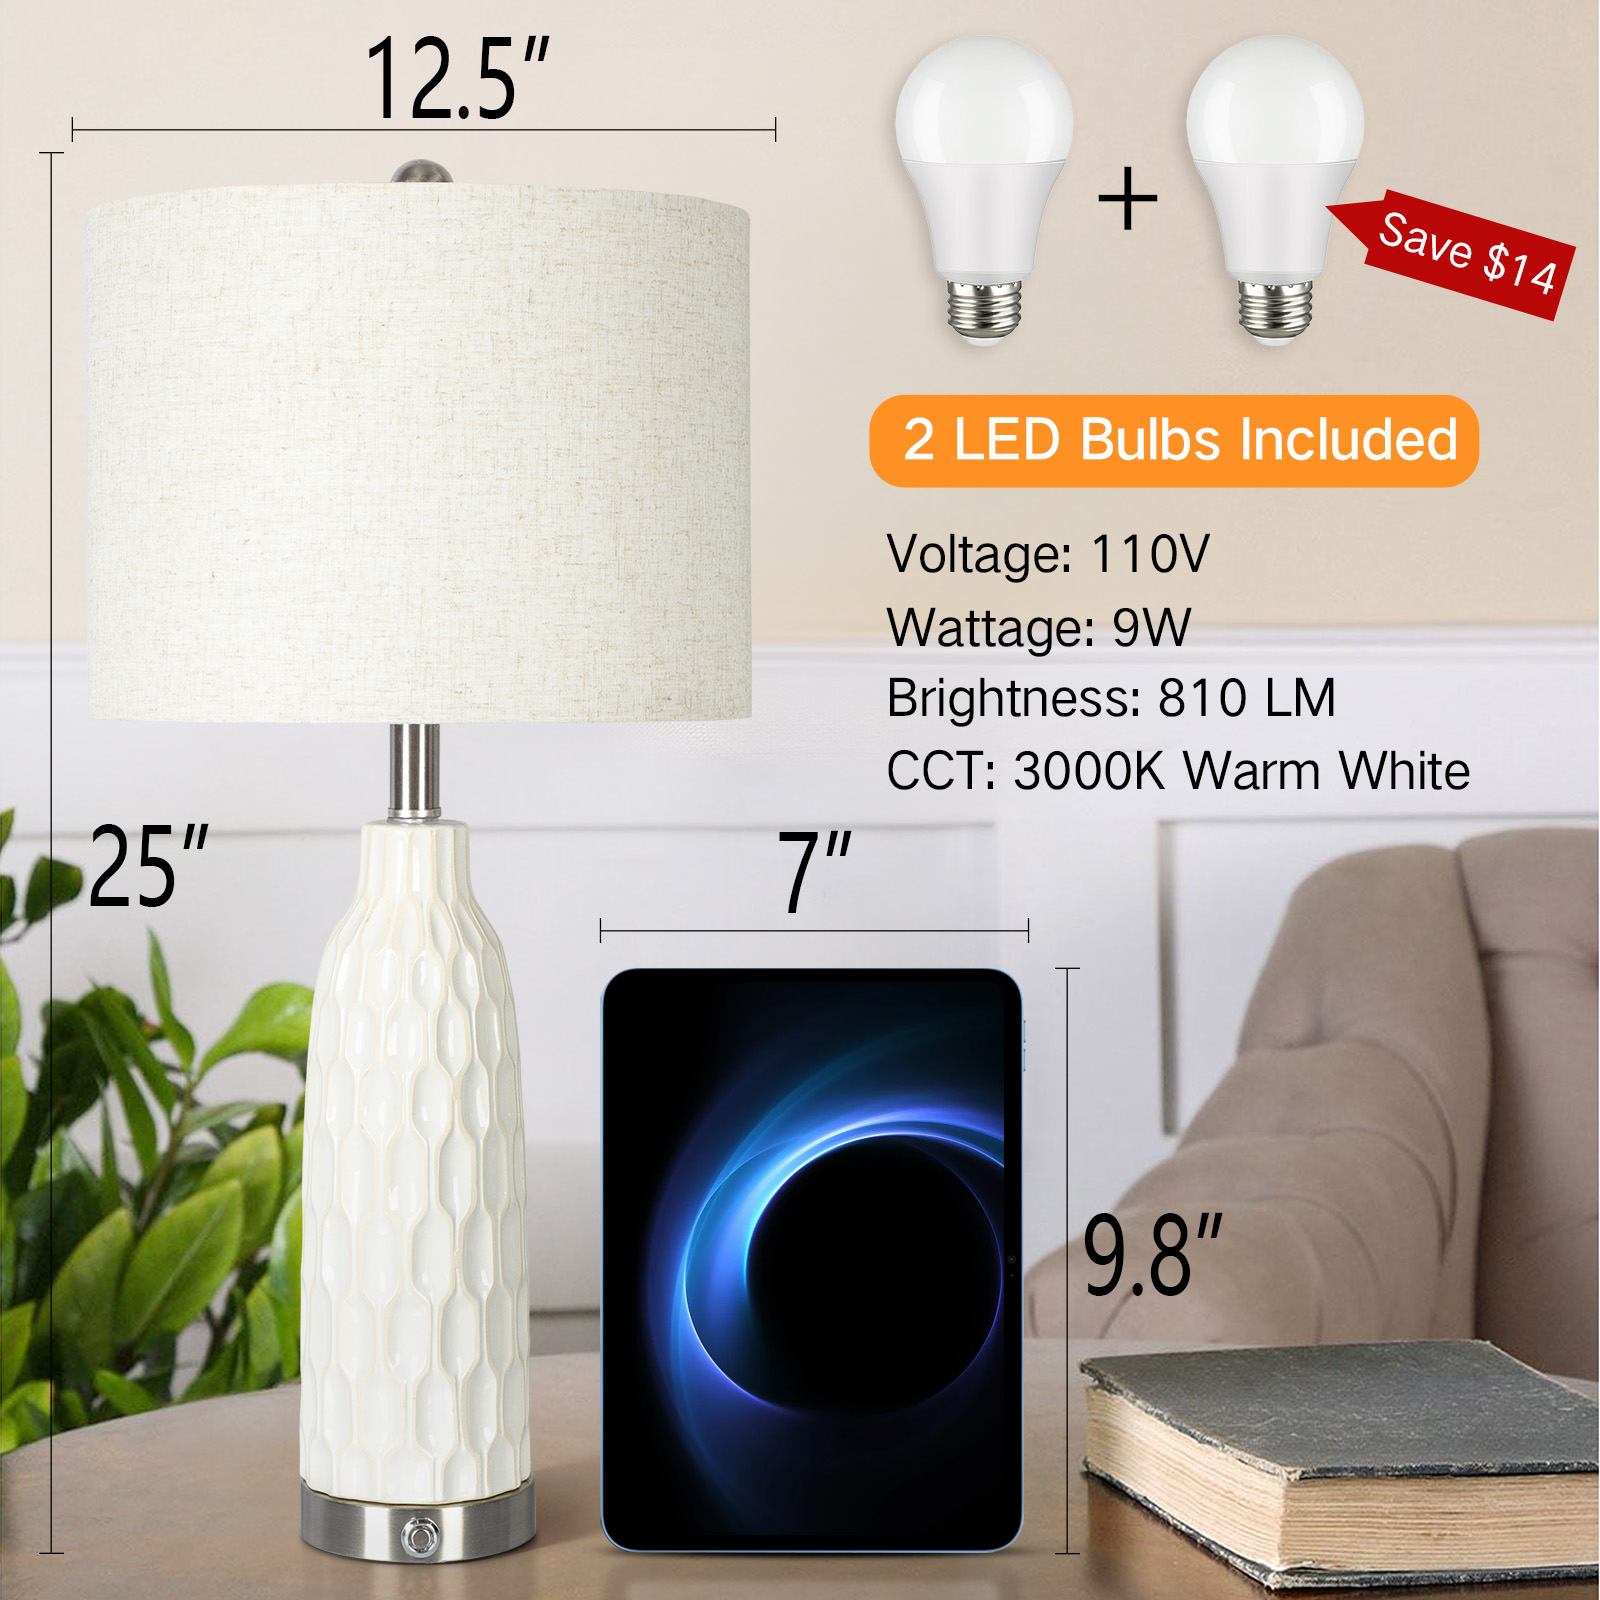 OUTON 26" Modern Table Lamp Set of 2 for Living Room, 3-Way Dimmable Ceramic Bedside Lamp with USB C+A Ports for Nightstand End Table - image 4 of 9